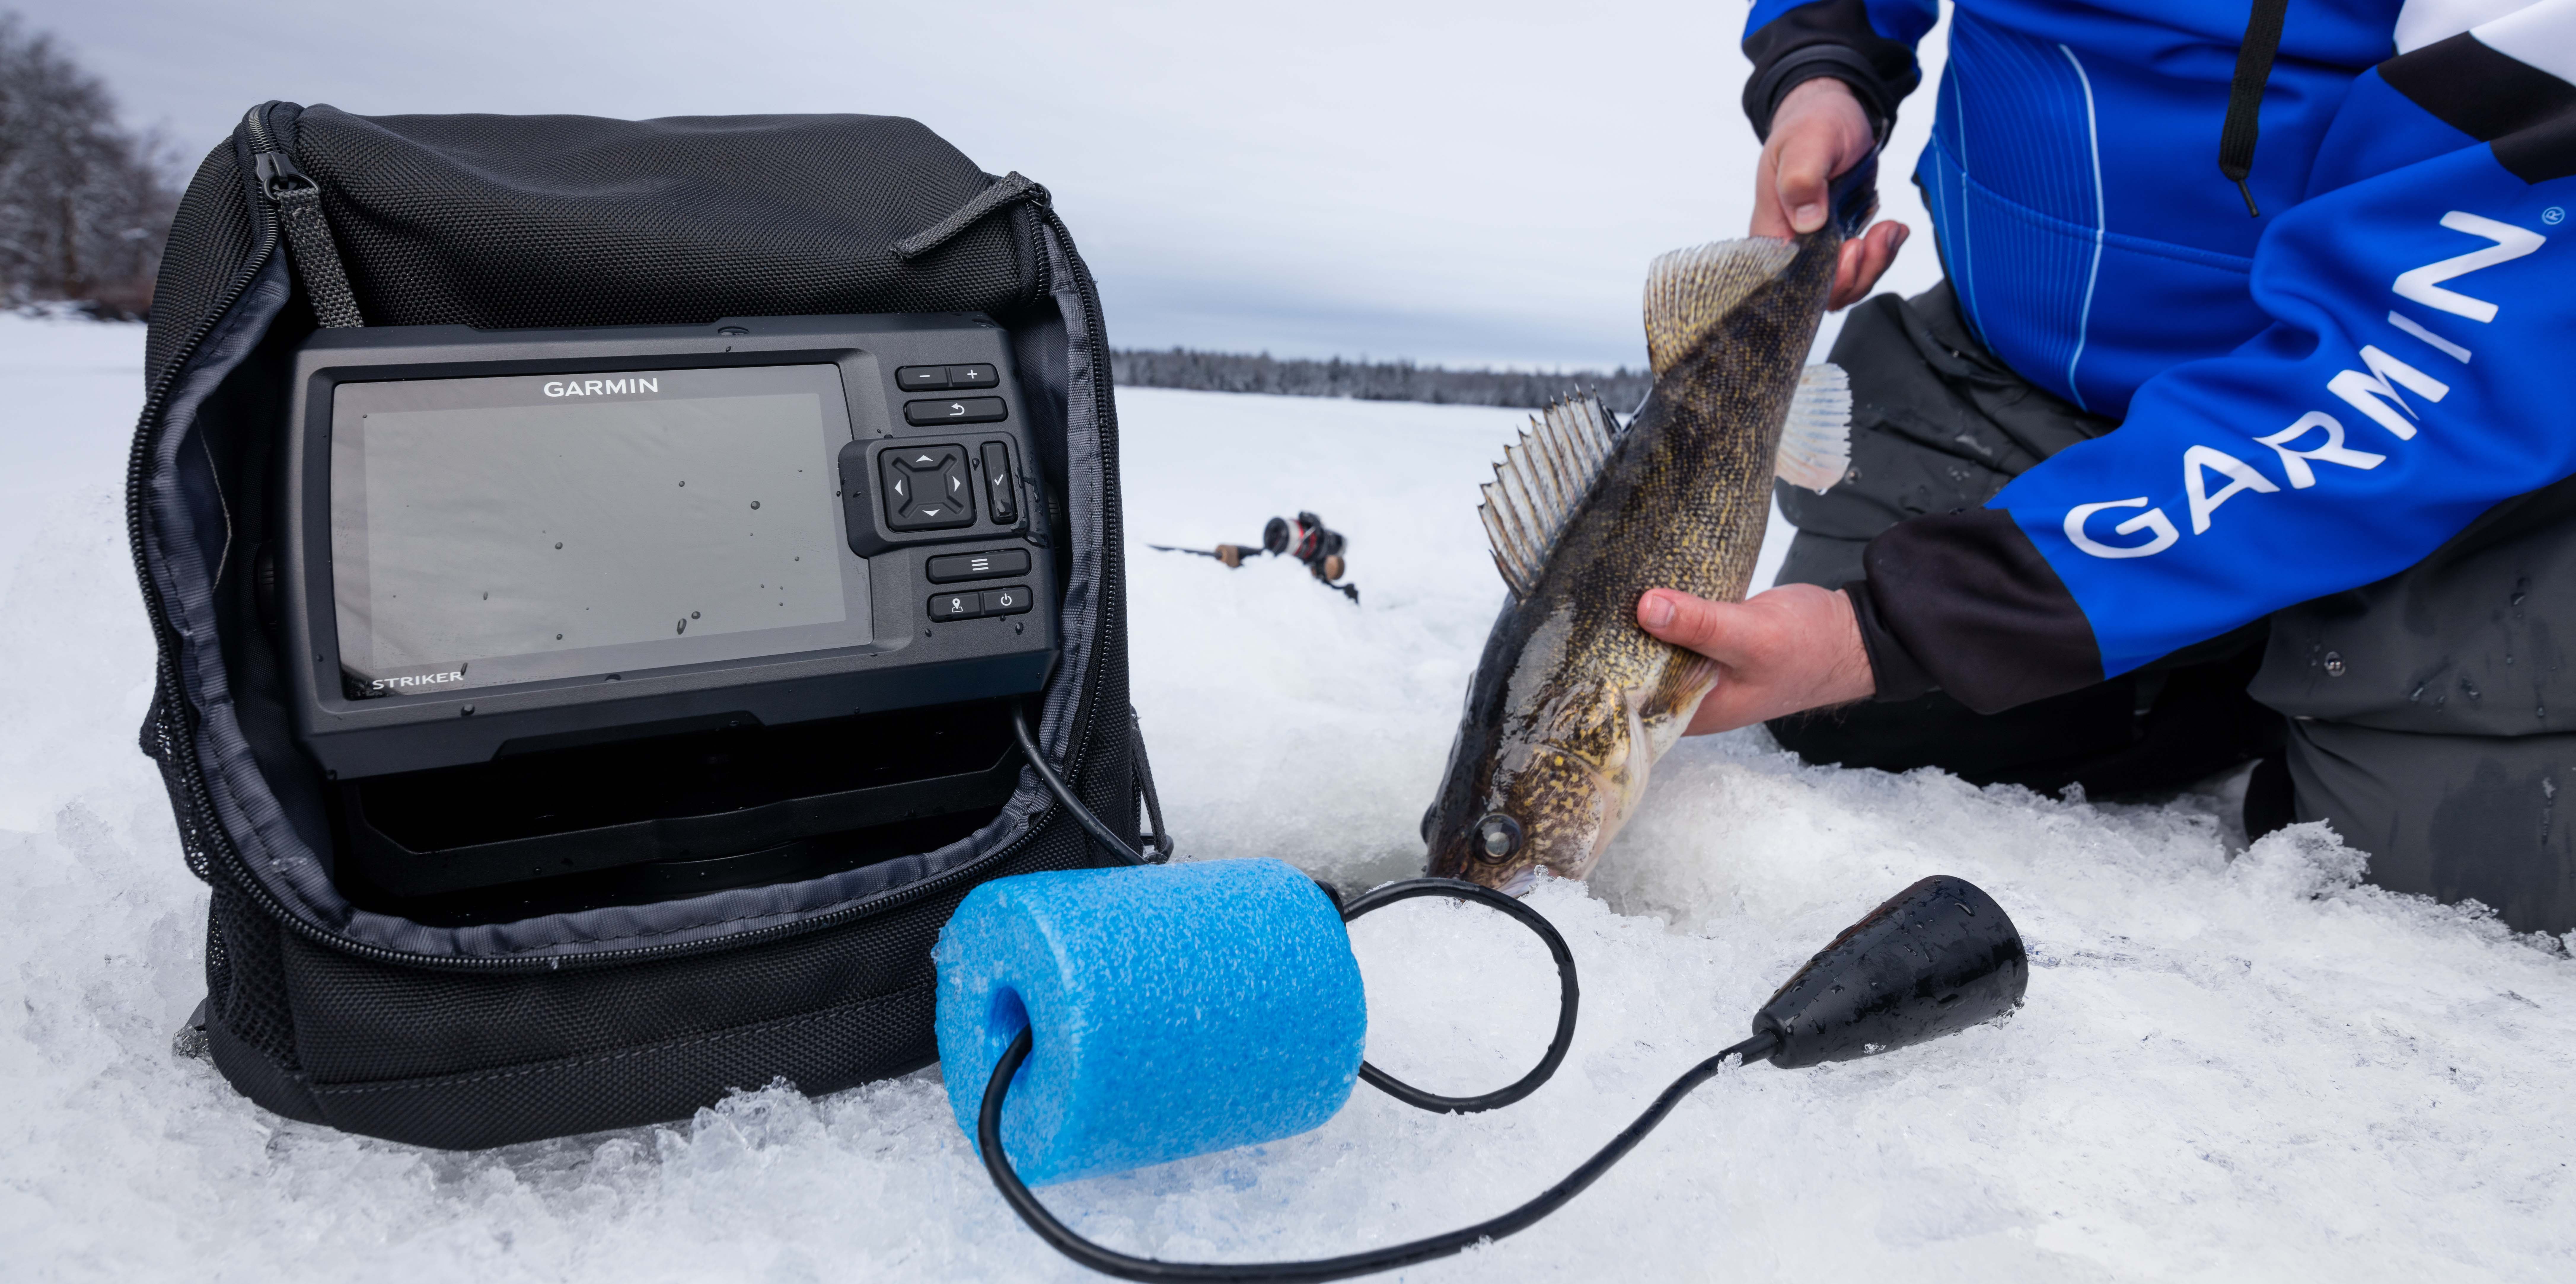 3 Portable Fishfinders for Ice Fishing – C2DJOY® Accessories for Garmin